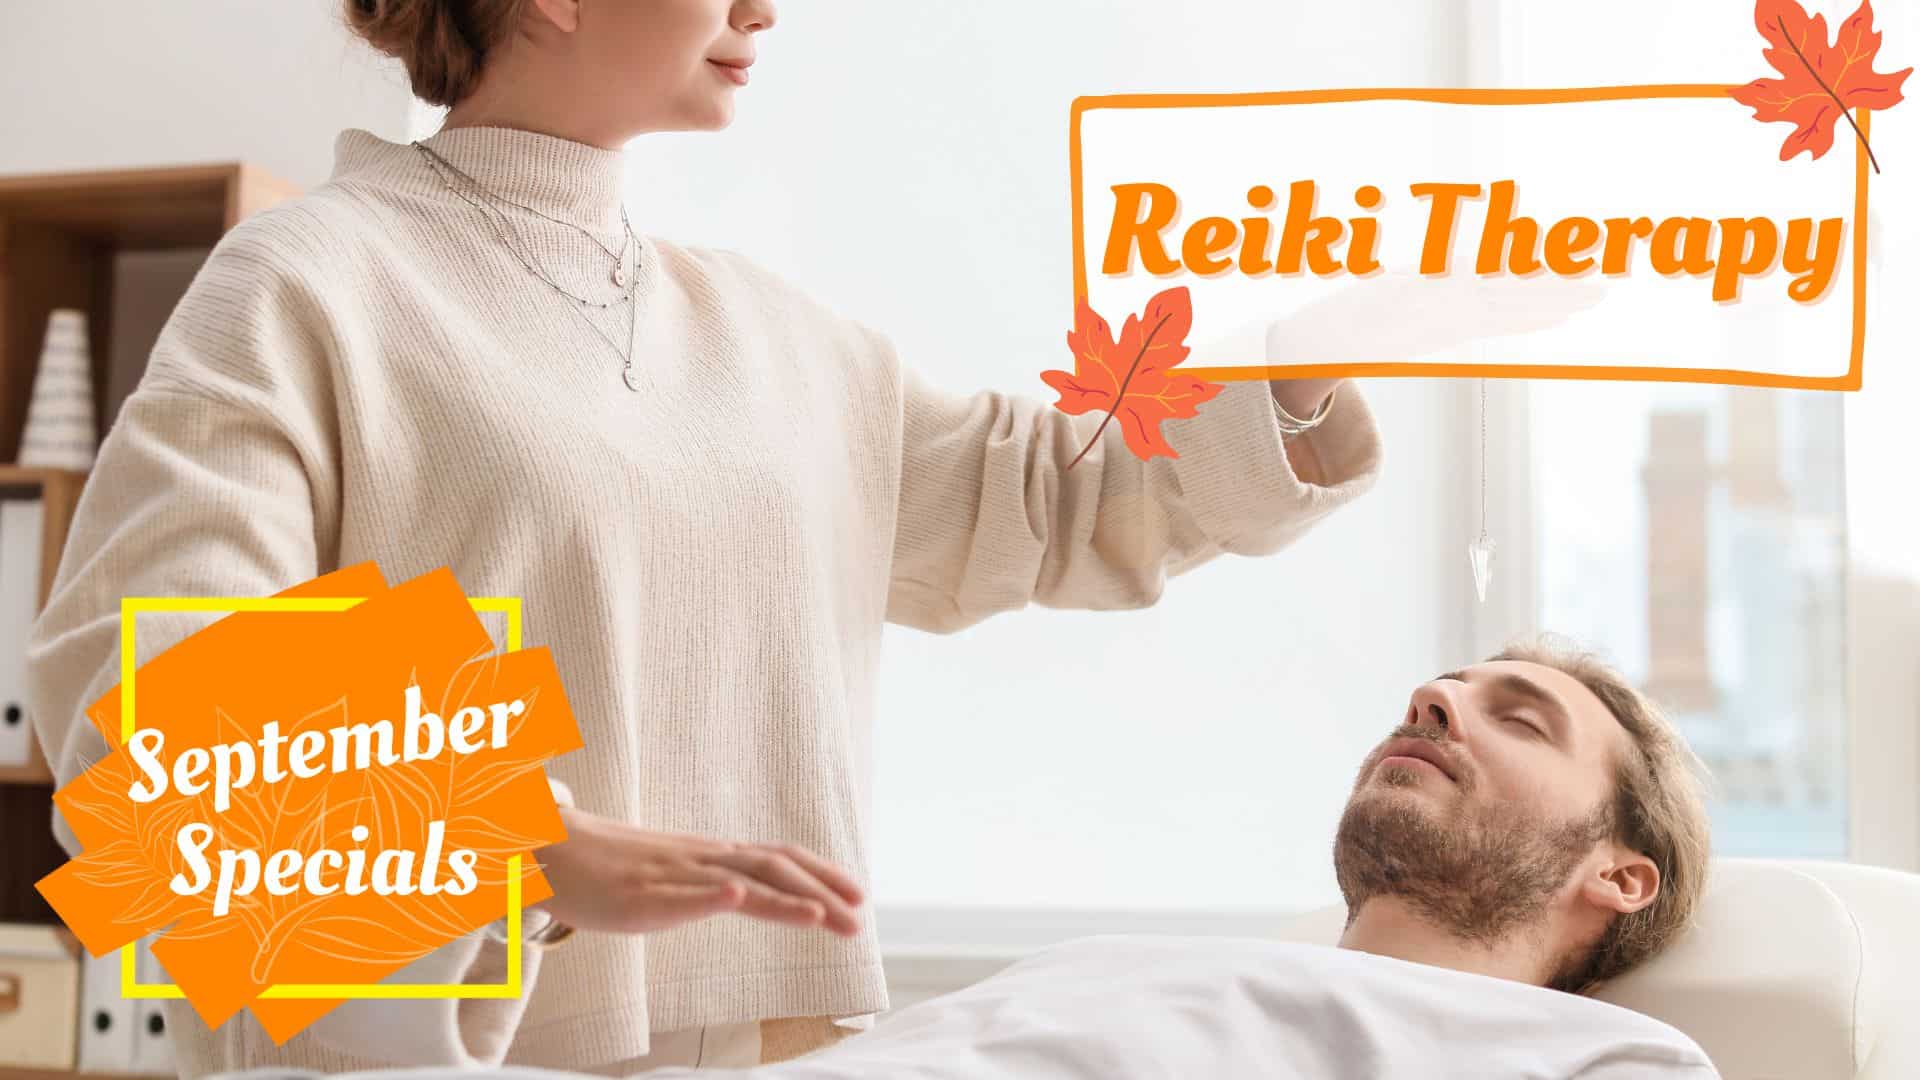 Specials - Reiki Therapy